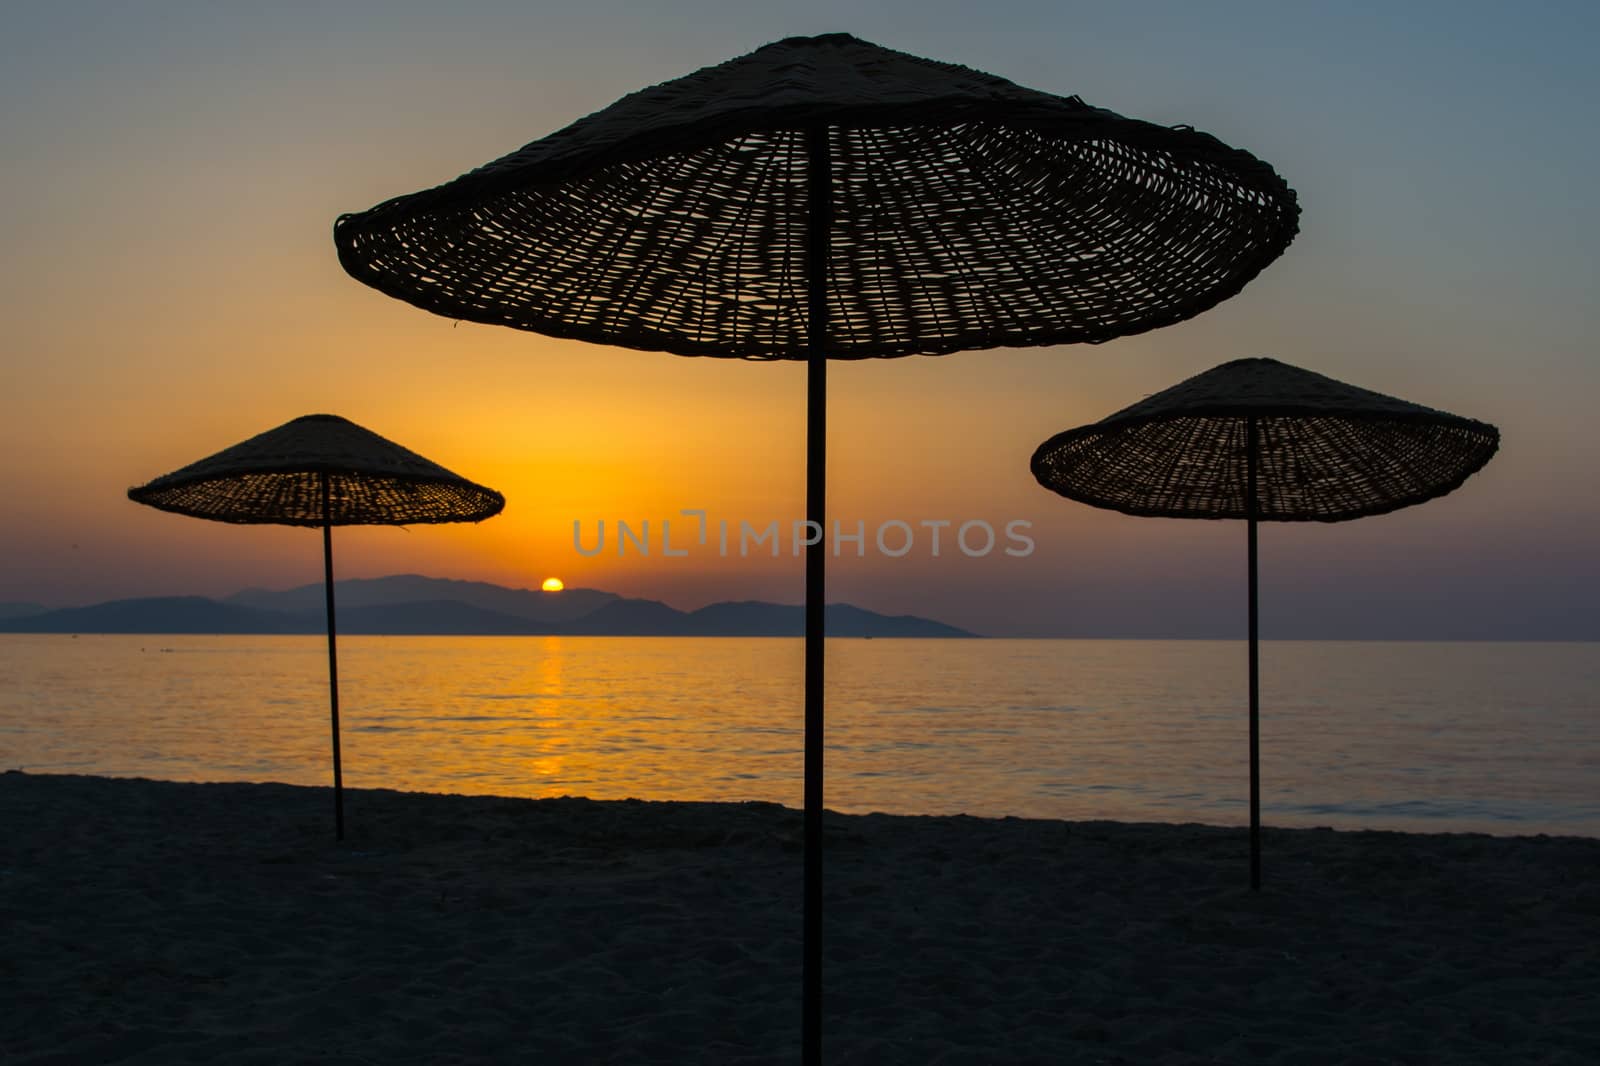 sunset. the umbrellas on the beach are empty and lonely.